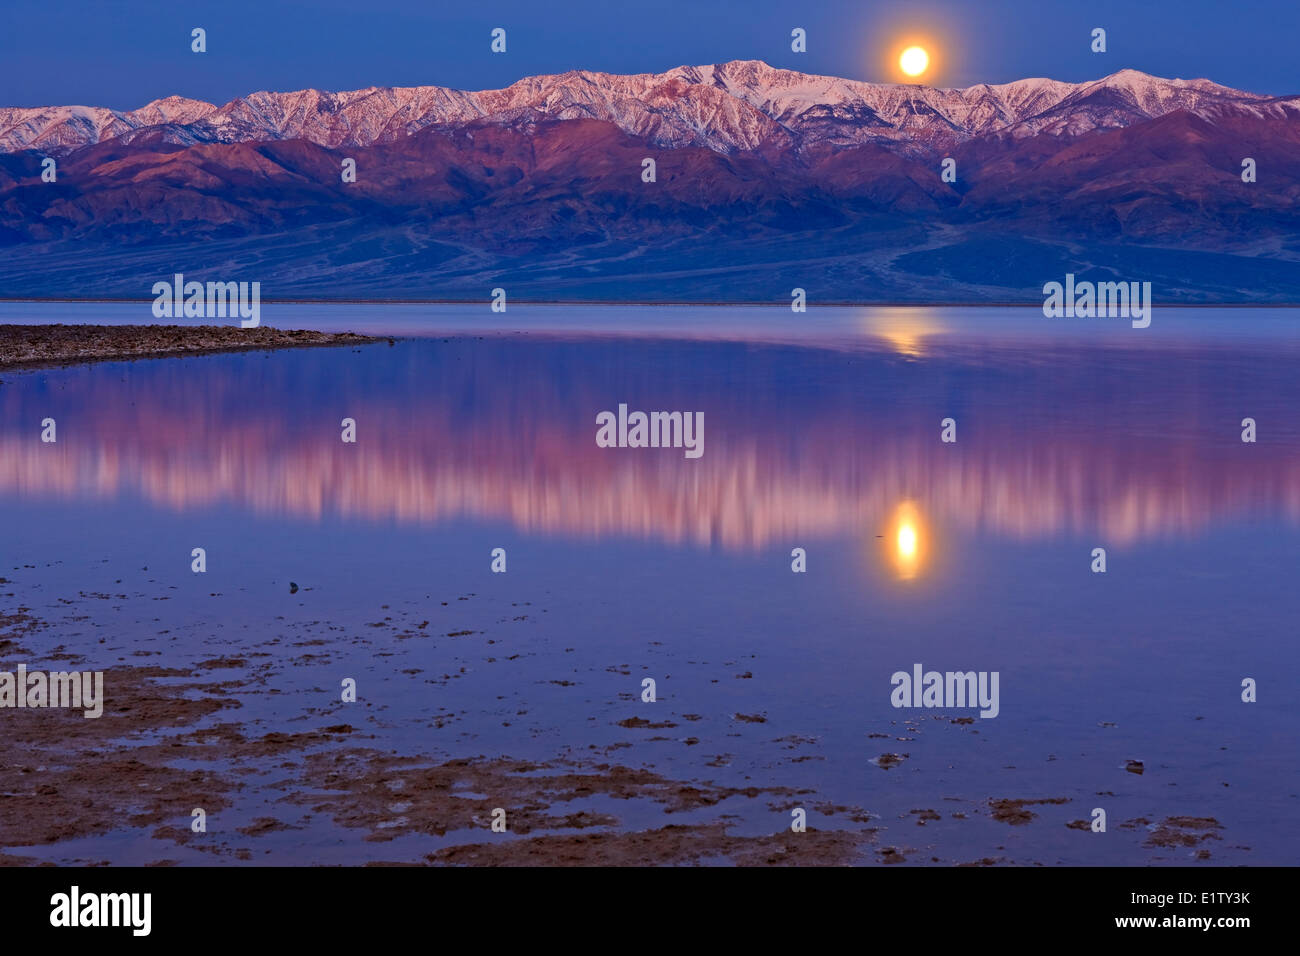 Reflections in Badwater Basin lake Moonrise over Panamint Mountains Badwater Basin Death Valley National Park California USA Stock Photo